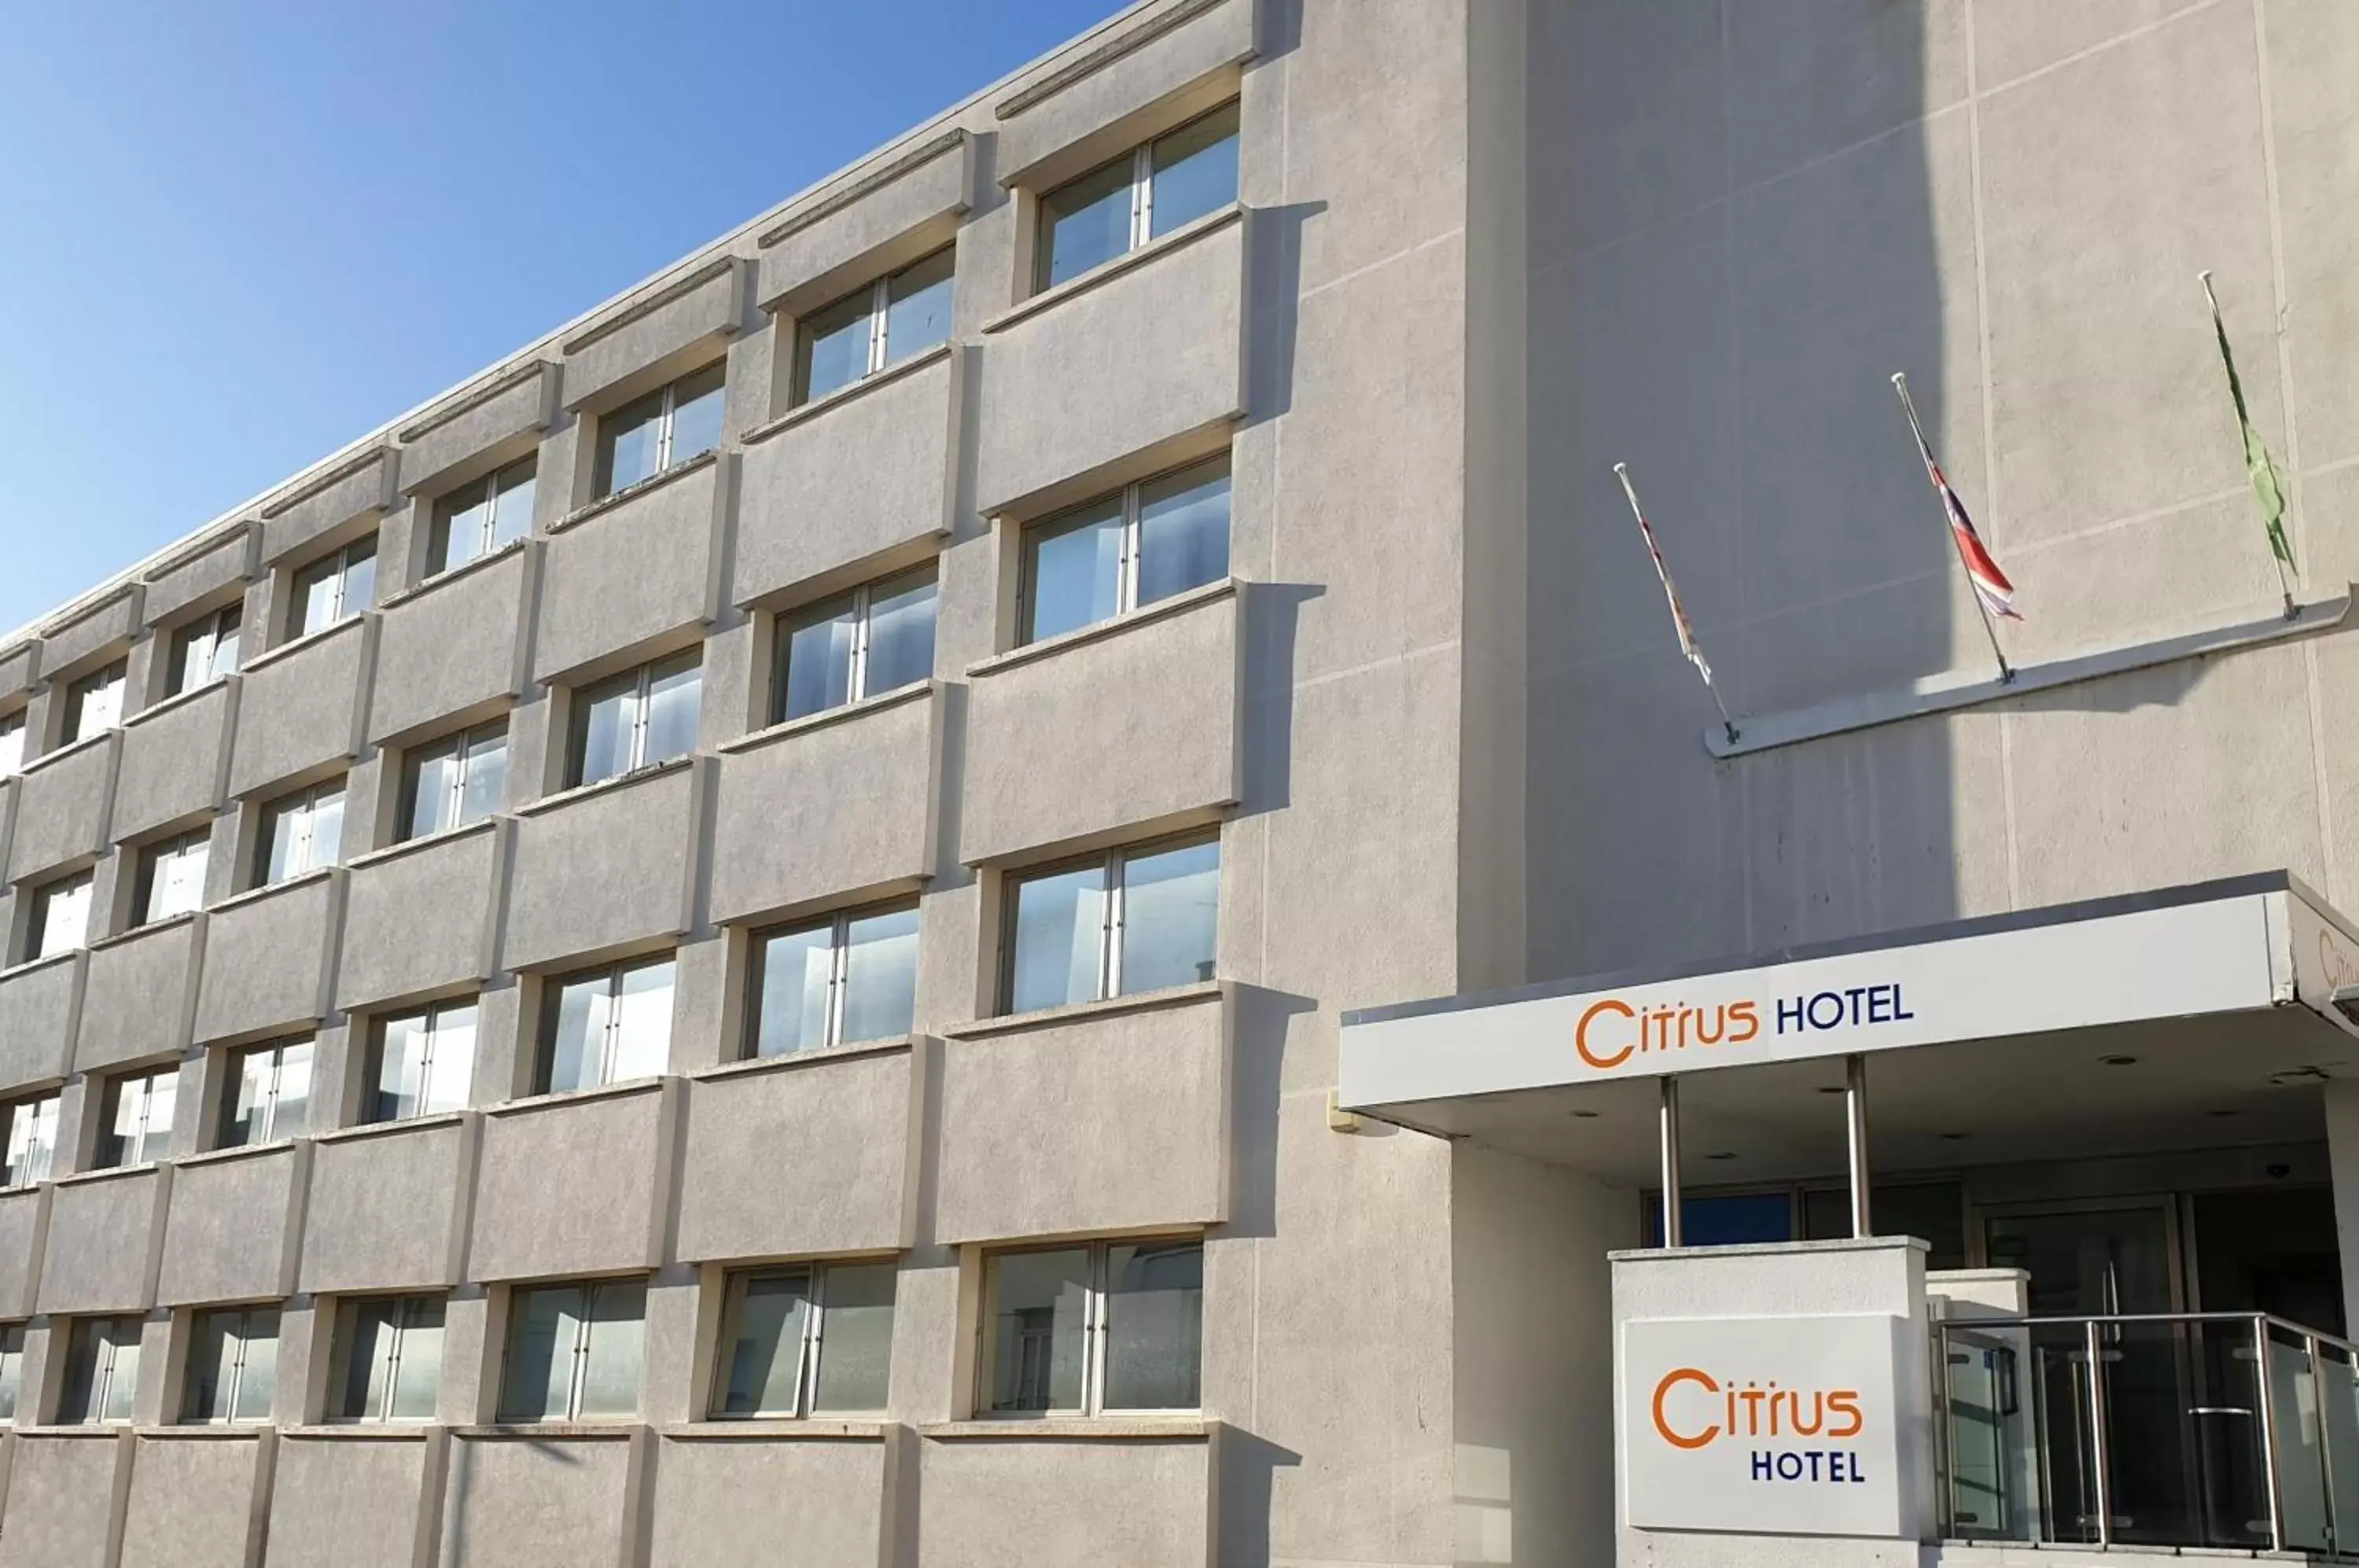 Property building in Citrus Hotel Cheltenham by Compass Hospitality